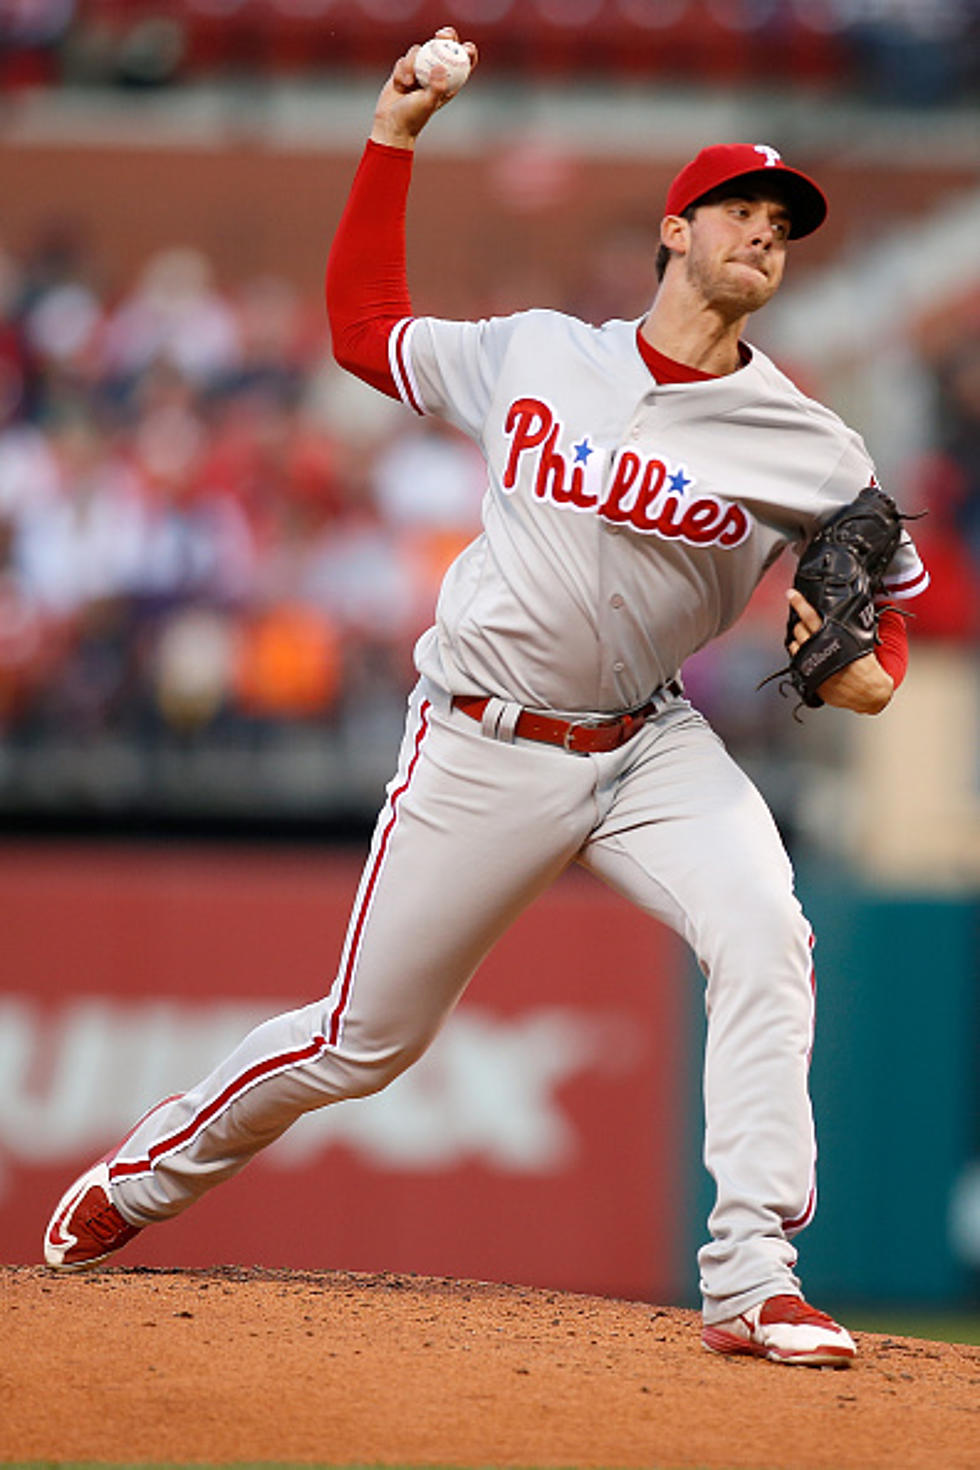 Phillies Place Starter Aaron Nola on the Disabled List